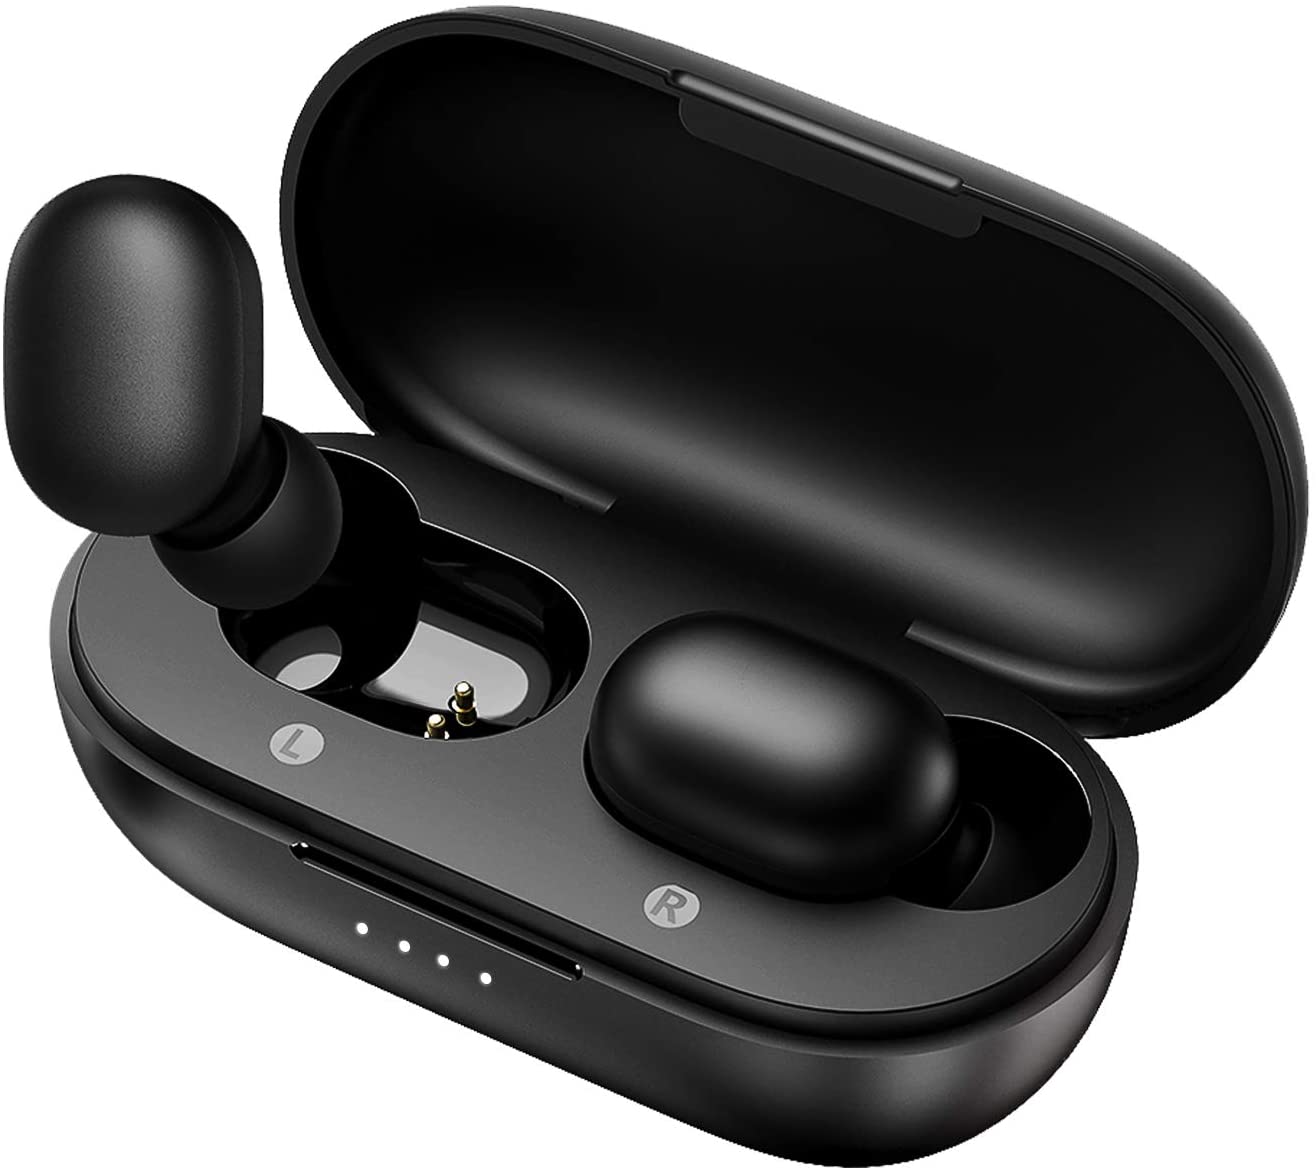 Haylou GT1 XR Bluetooth Earbuds,Qualcomm 3020 Chip Wireless Earphones with Touch Control,36hr Battery Life